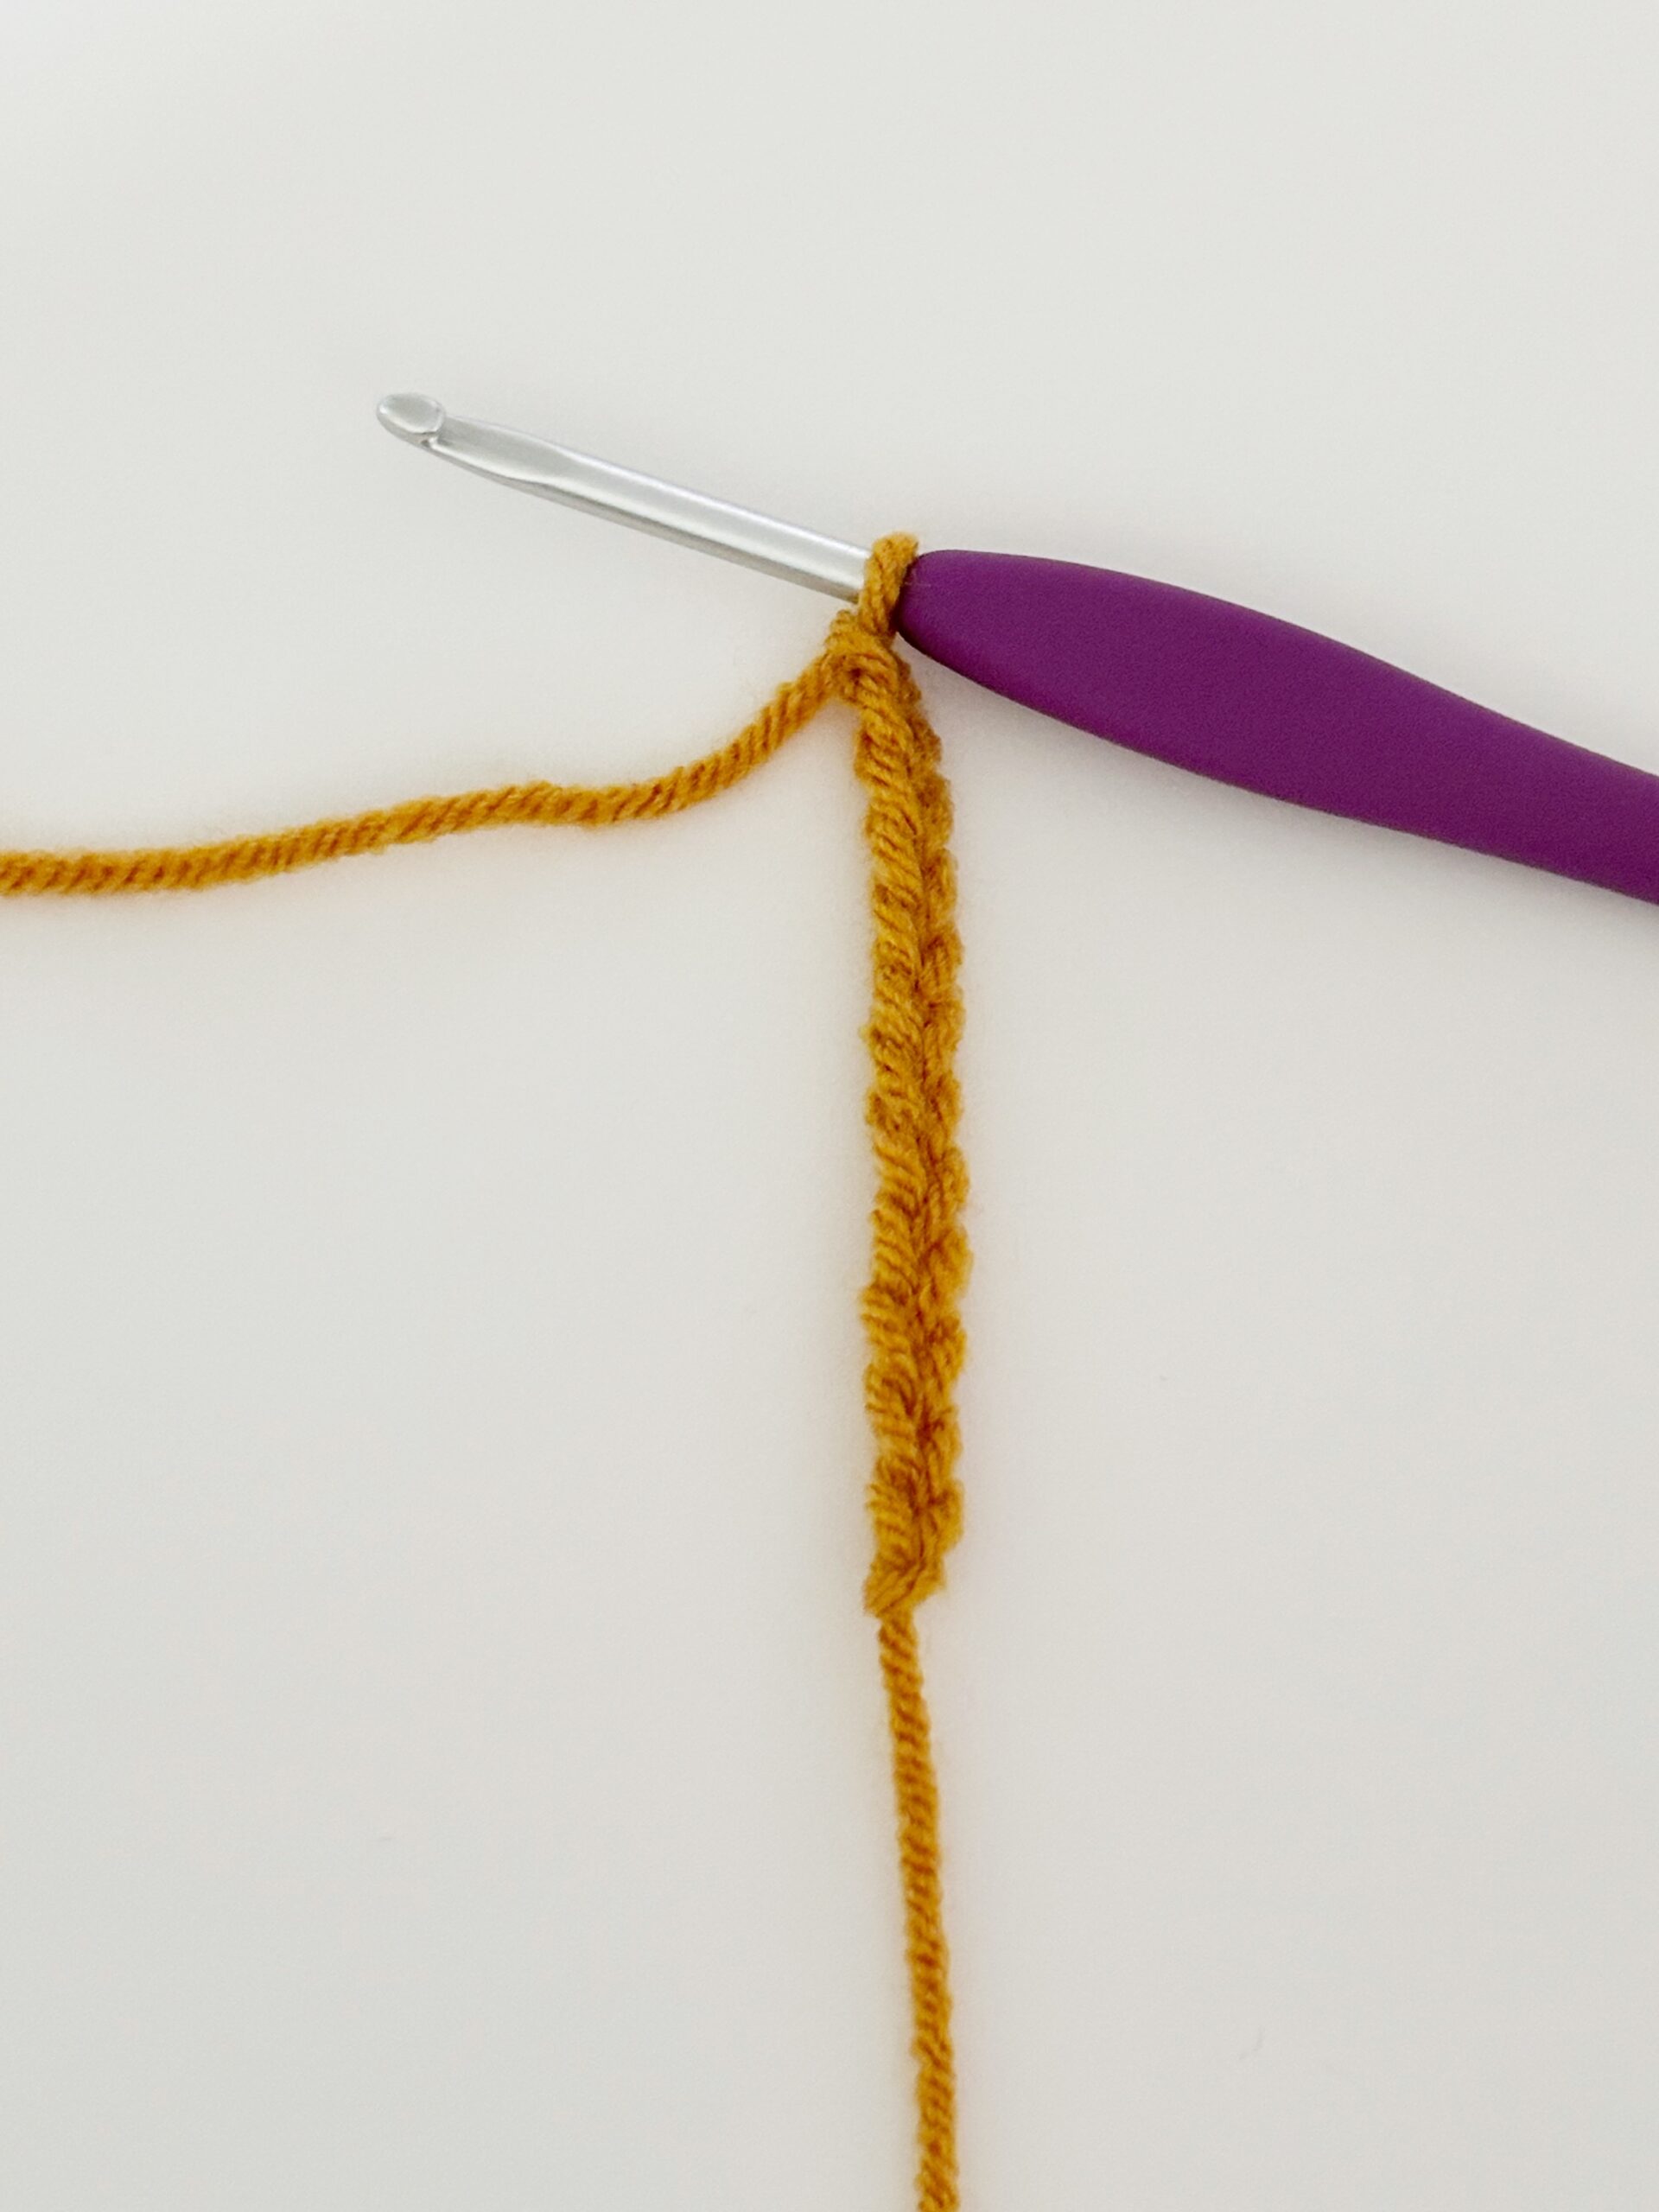 Working in an Oval Shape on the Other Side of the Chain for Amigurumi Foundation Chain